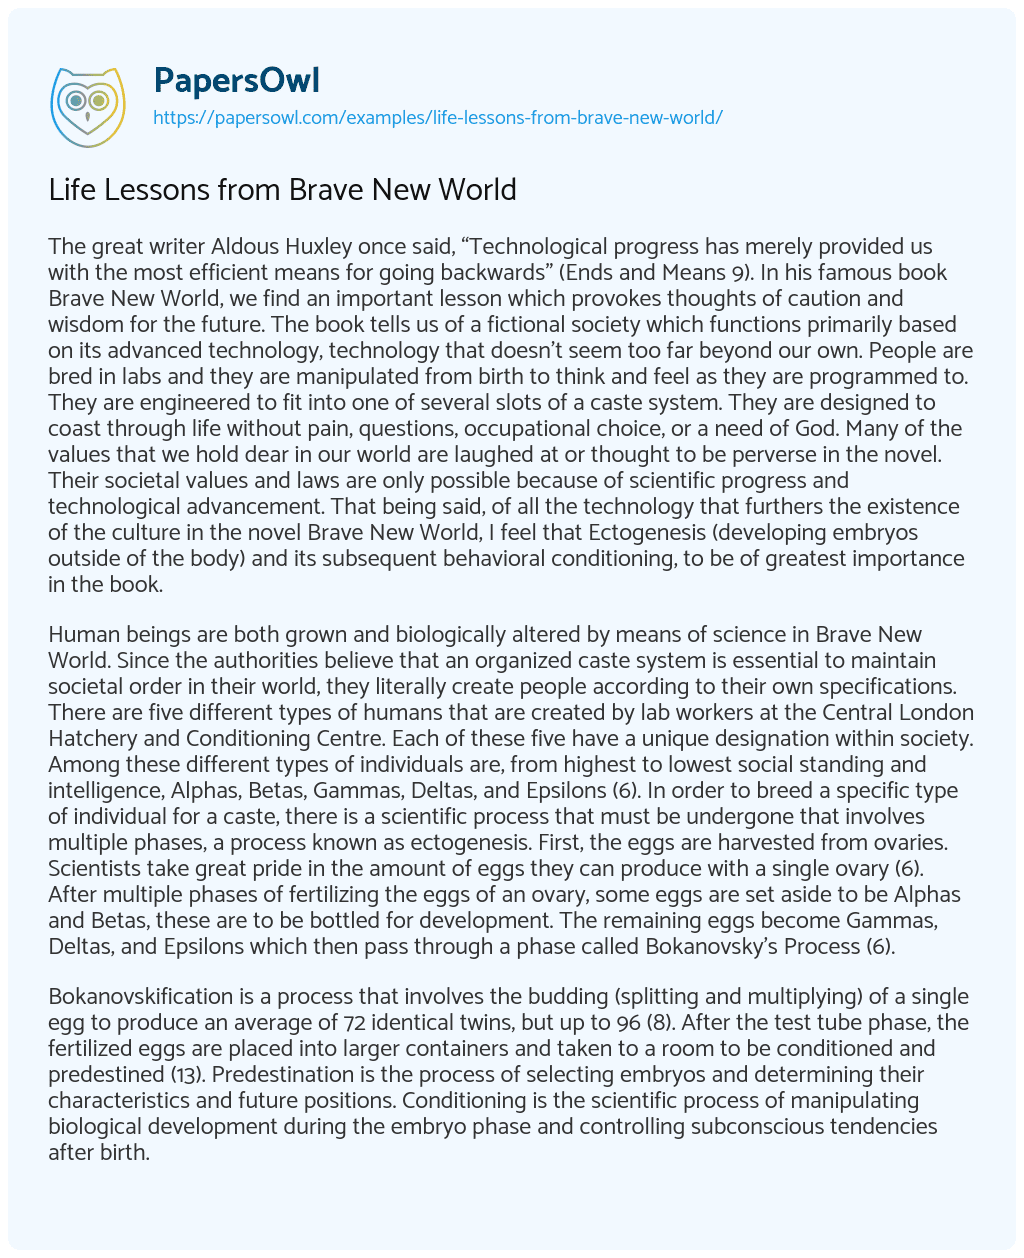 Essay on Life Lessons from Brave New World